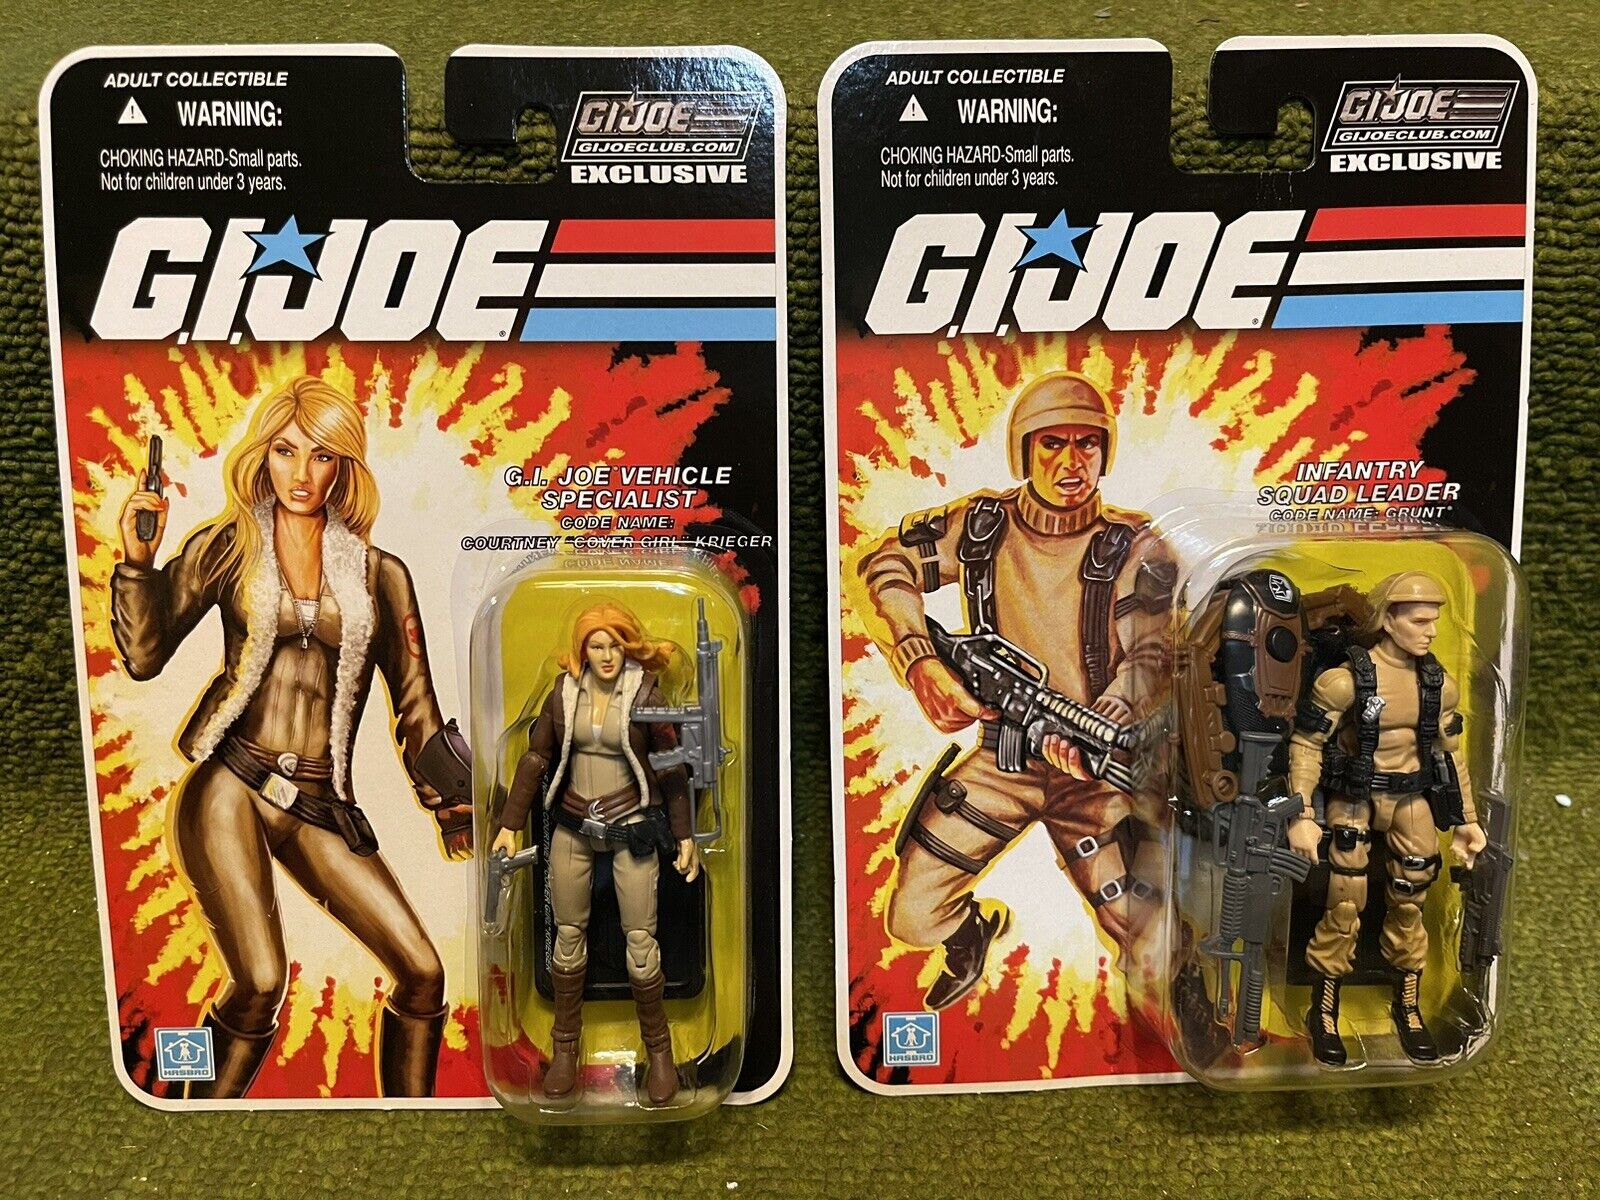 GI Joe Collectors Club Exclusive 1 - 05 Cover Girl And 1 - 06 Grunt